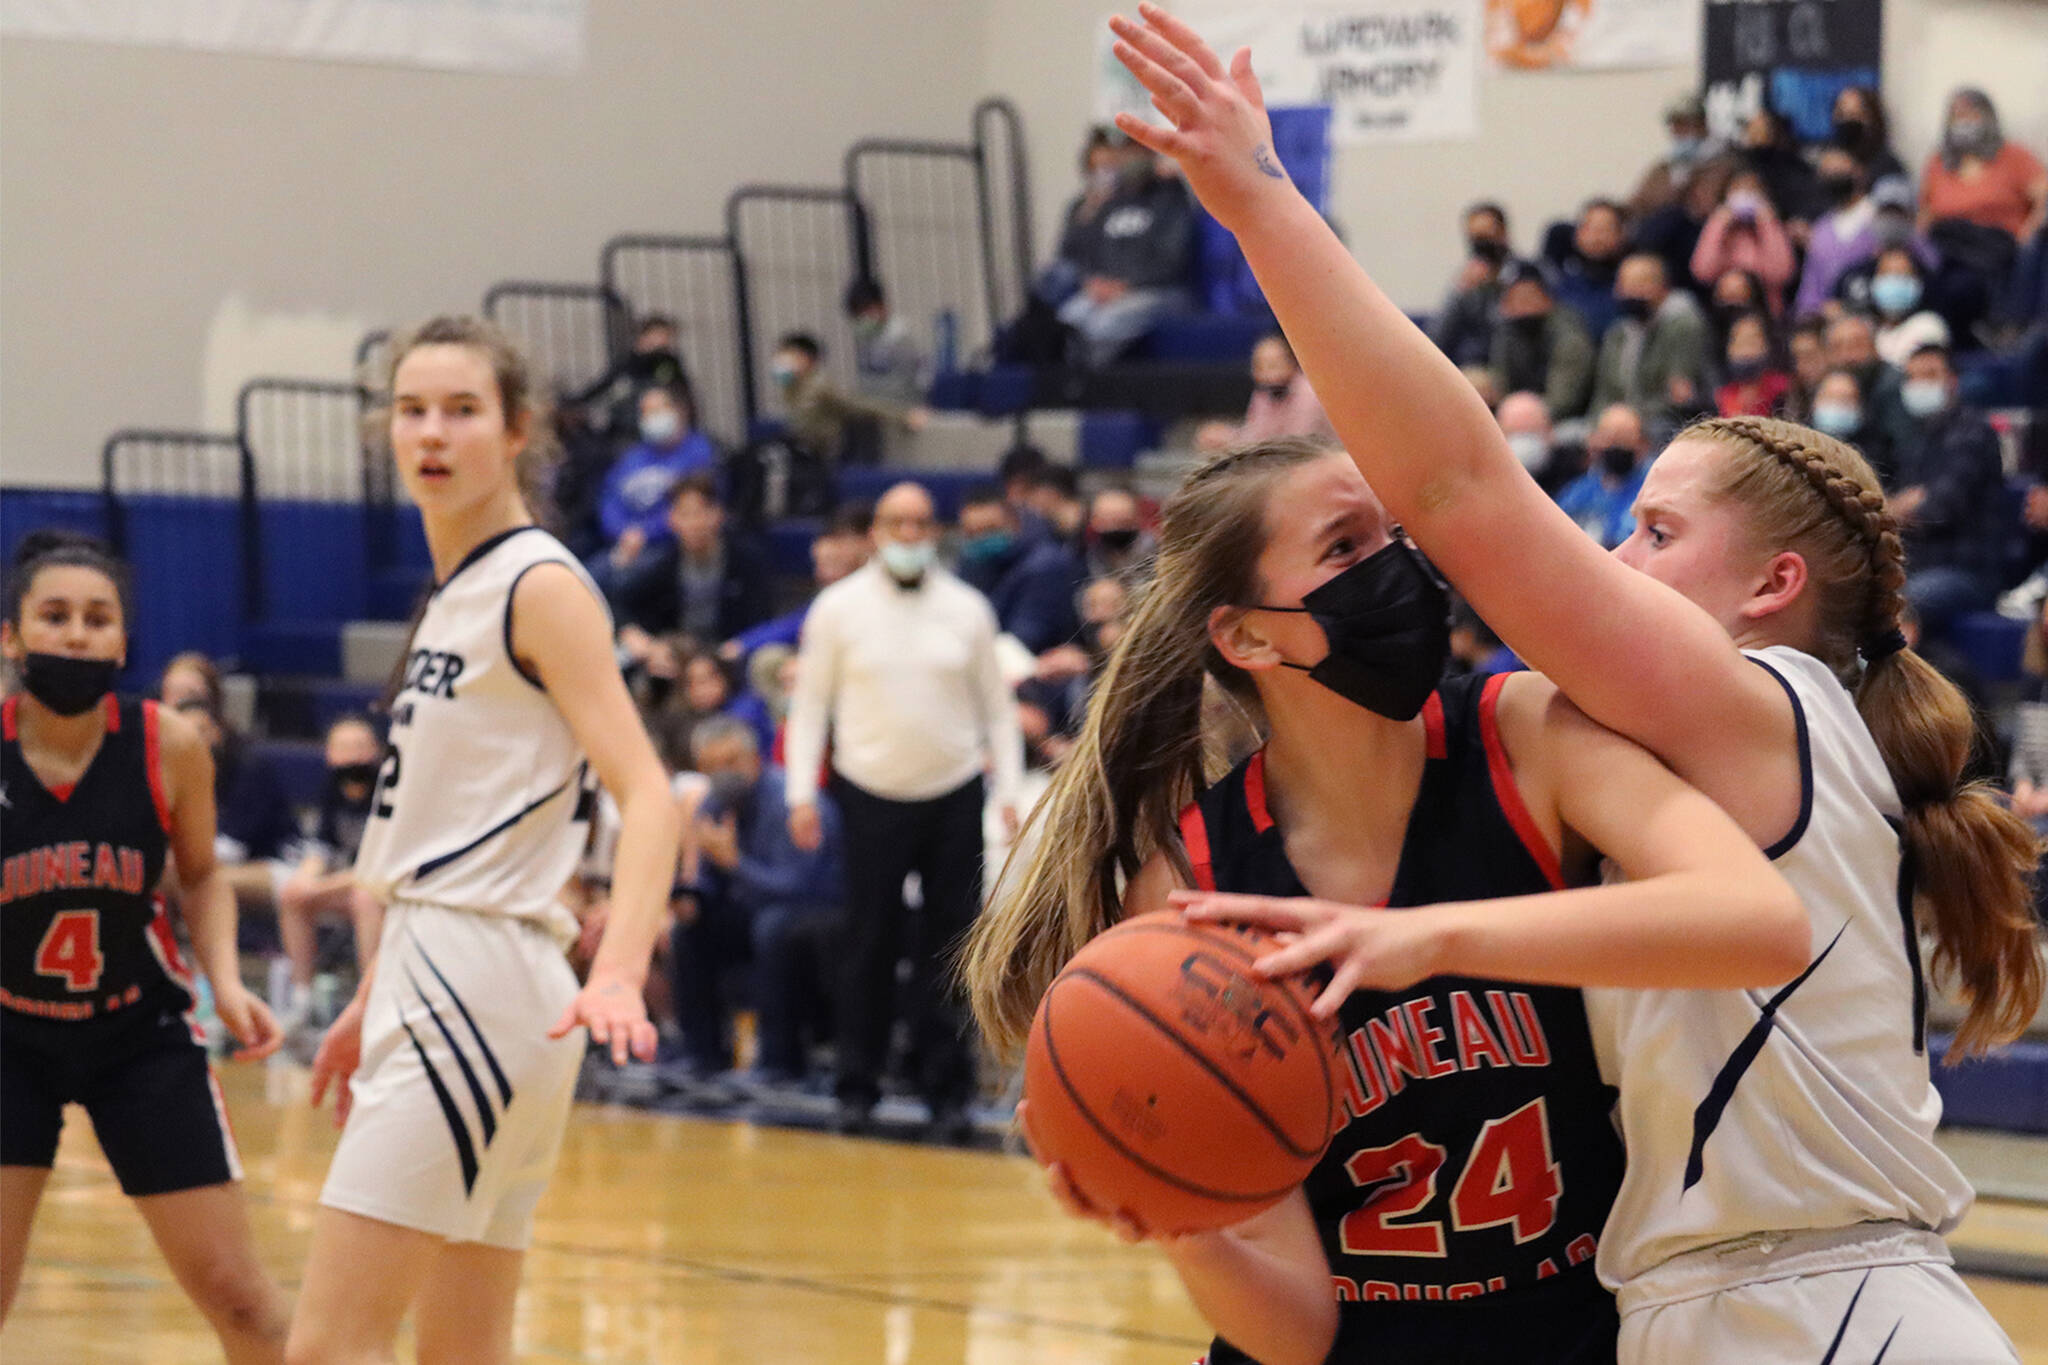 JDHS' Mila Hargrave pivots toward the hoop for a tough inside shot while tightly defended by TMHS' Sydney Strong. In the background JDHS' Kiyara Miller and TMHS' Kerra Baxter look on. (Ben Hohenstatt / Juneau Empire)